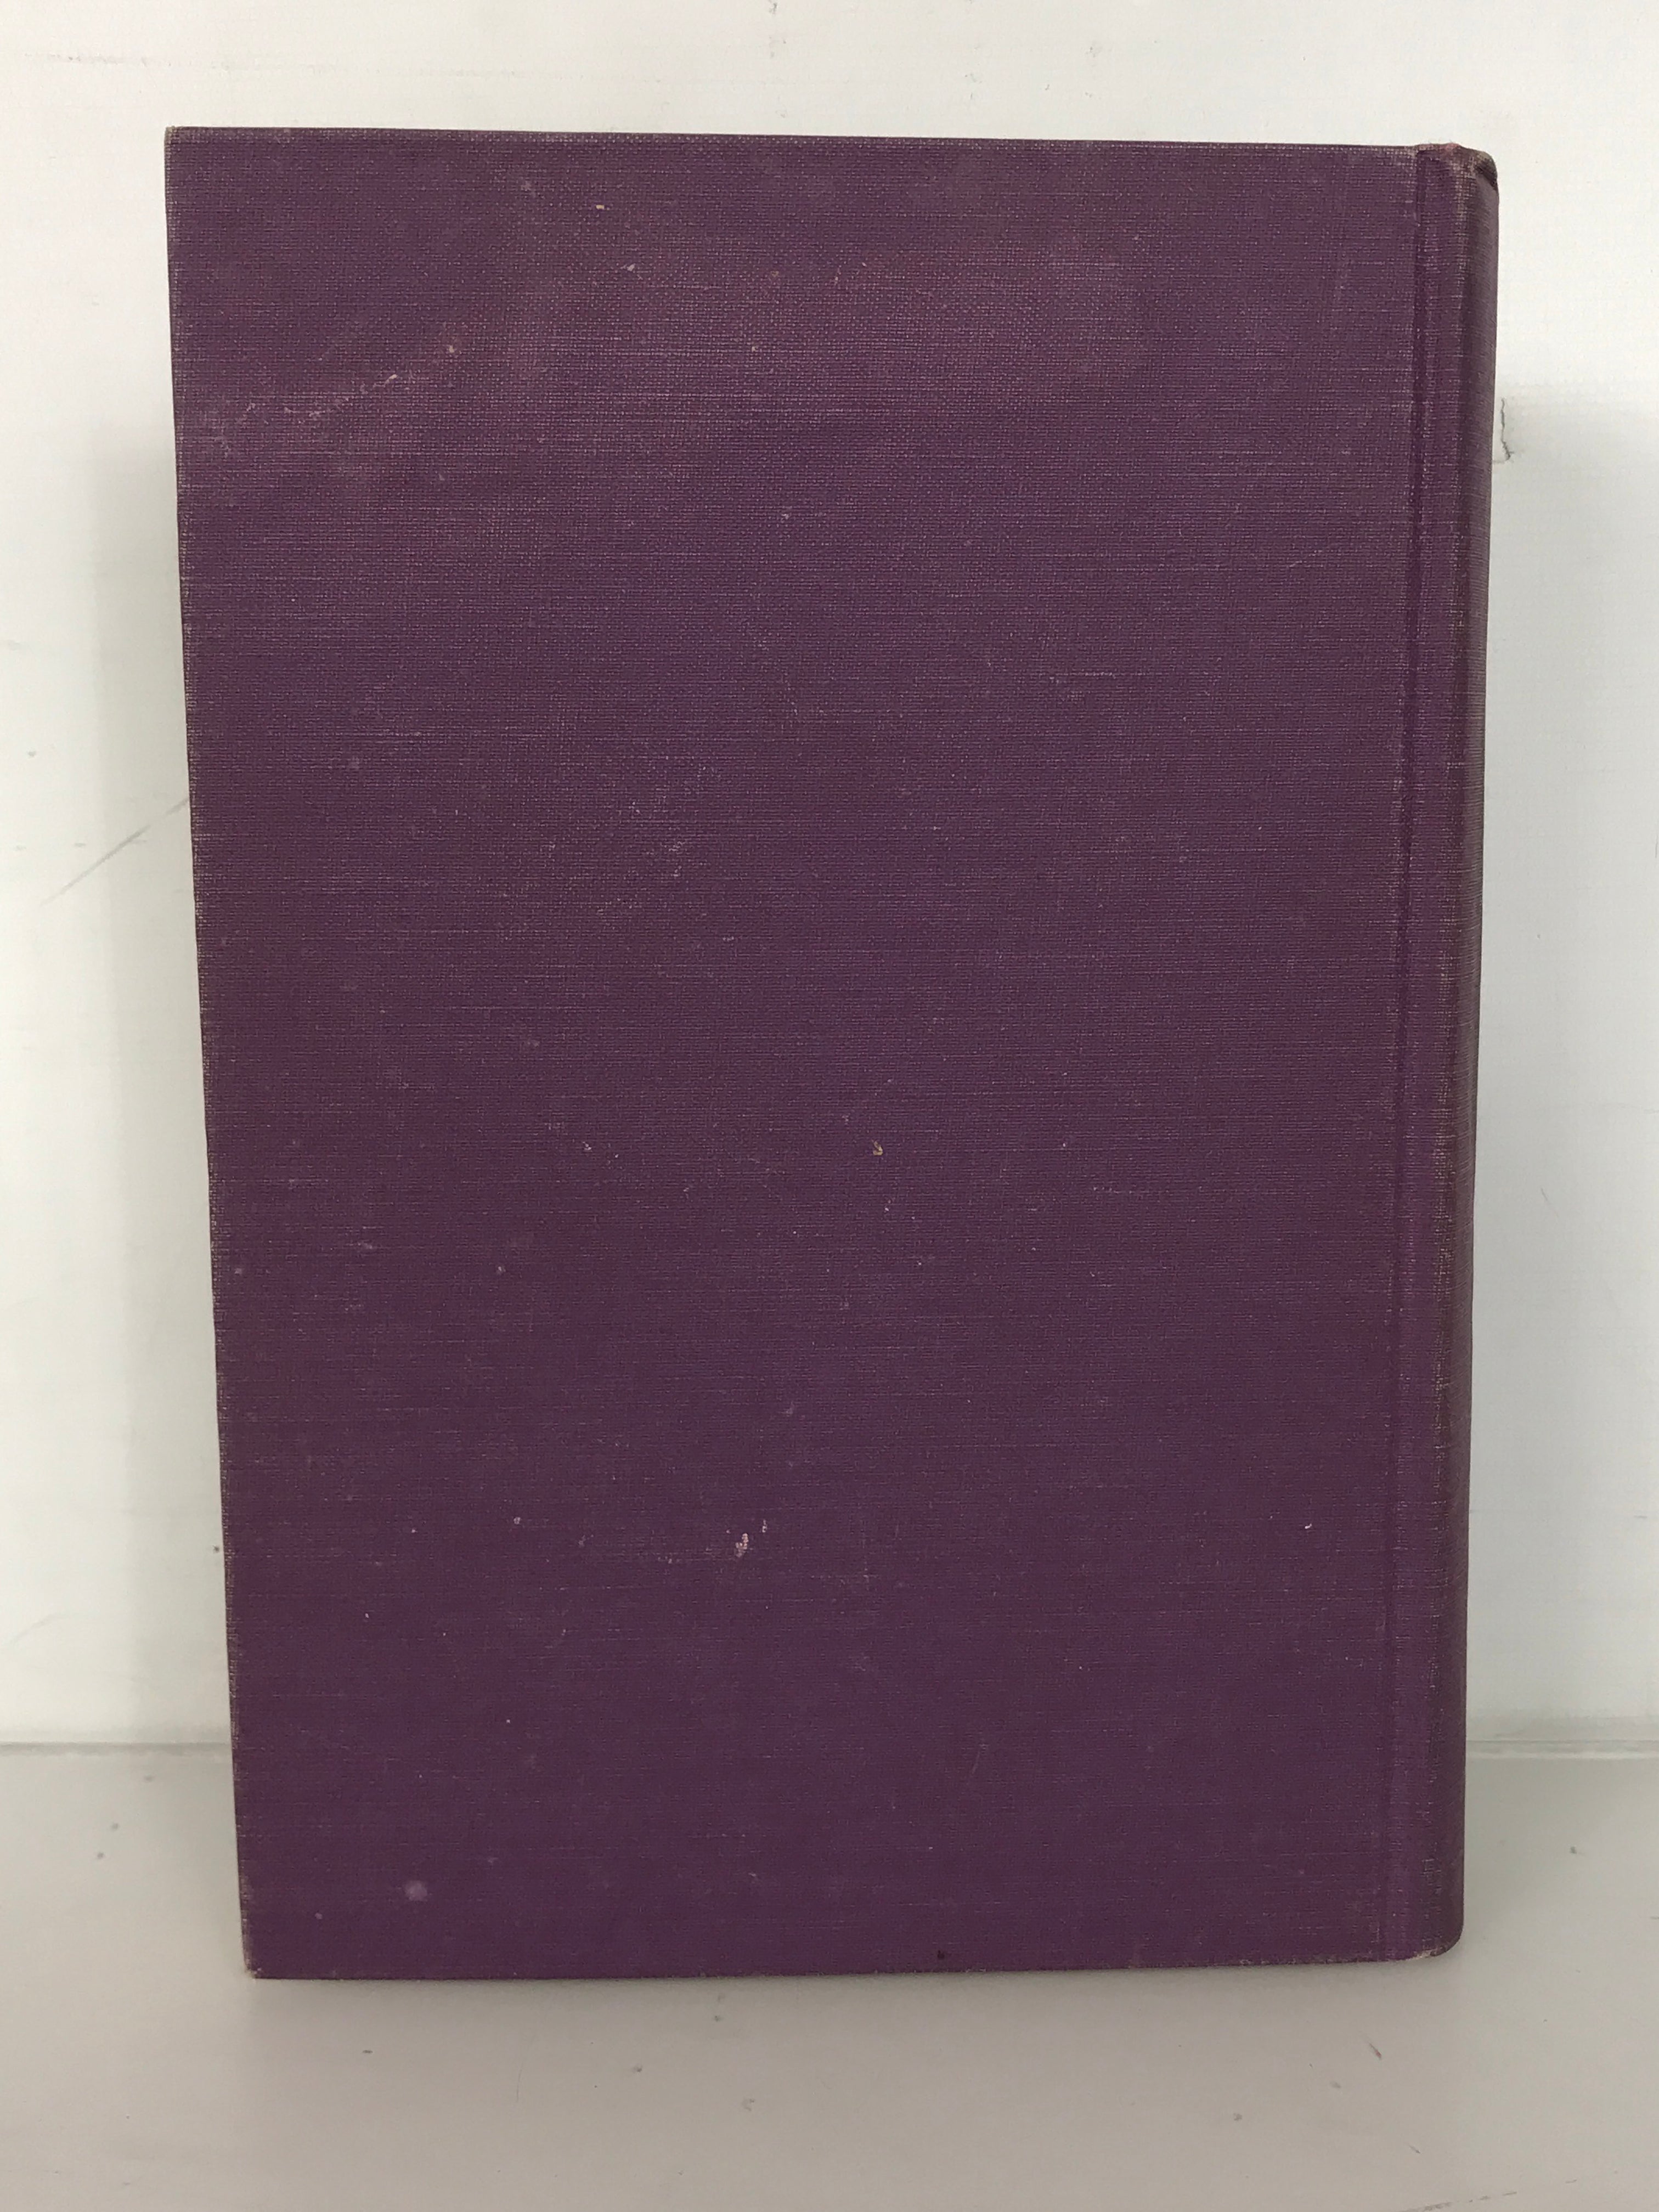 The College Anthology of British and American Verse by Hieatt and Park 1965 HC